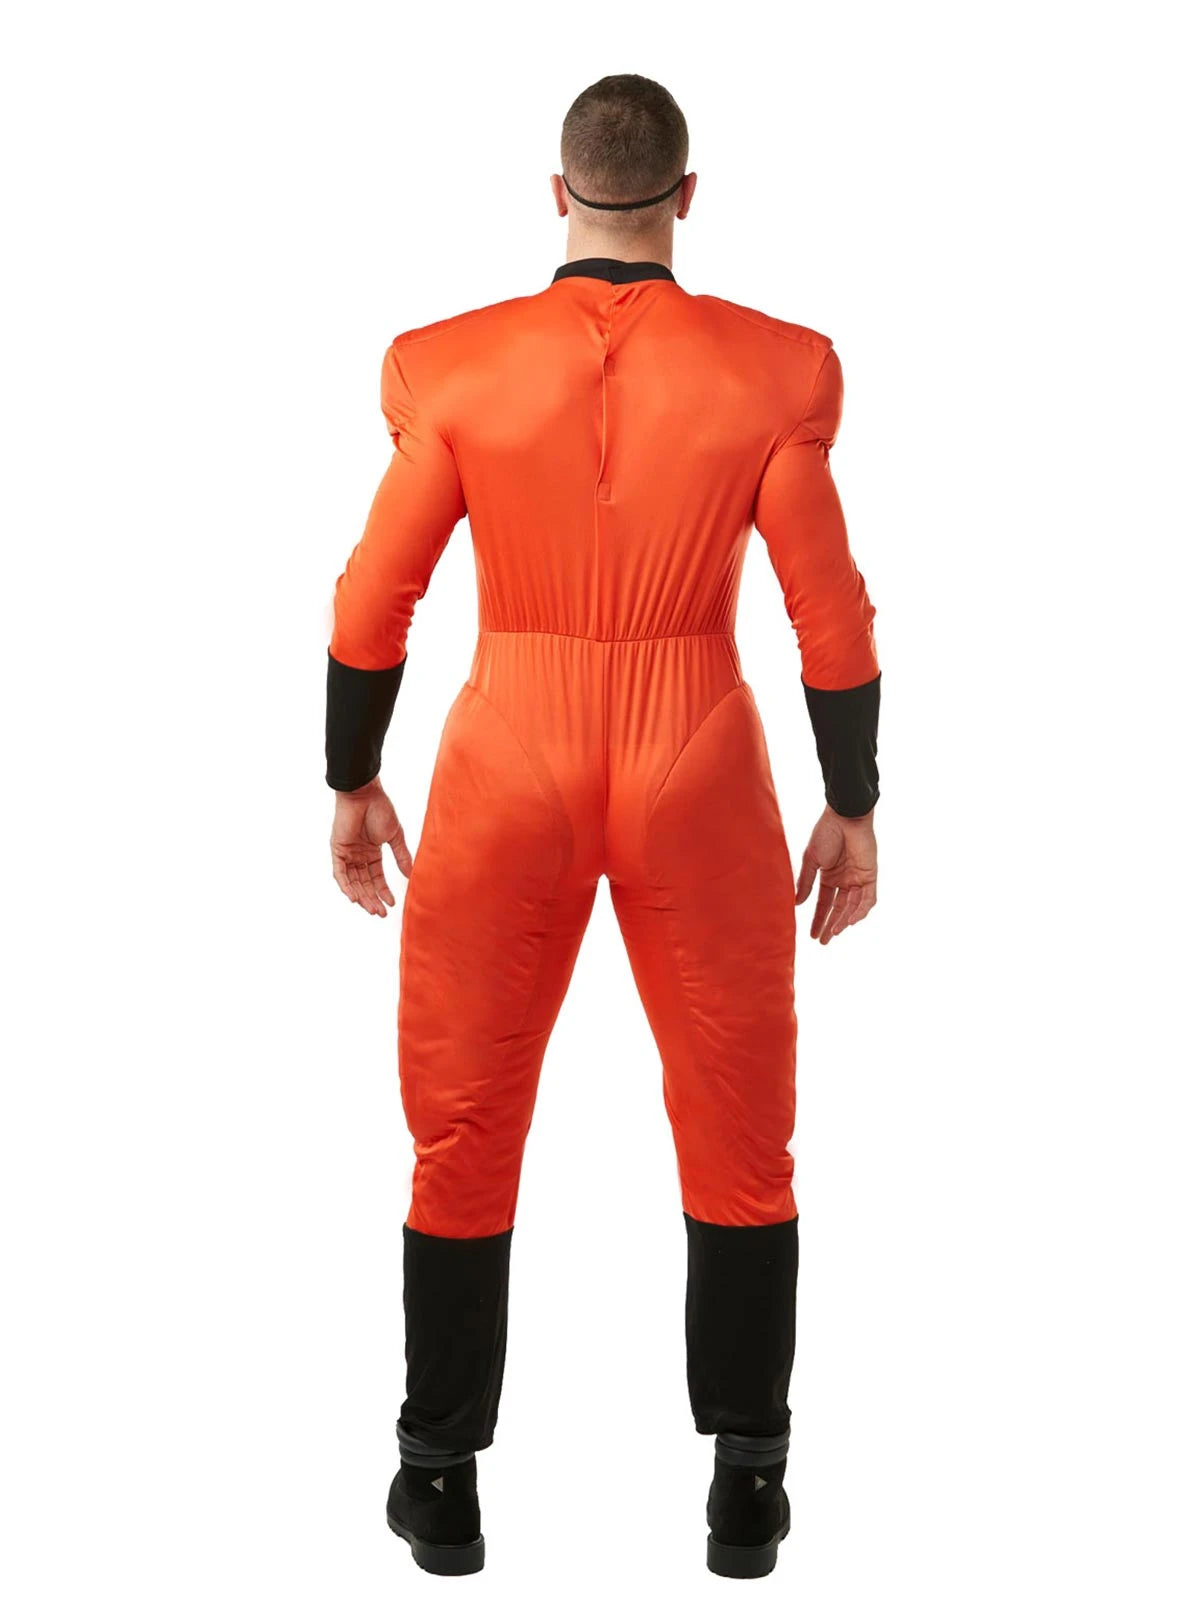 Disney The Incredibles 2 Mr Incredible Deluxe Adult Costume